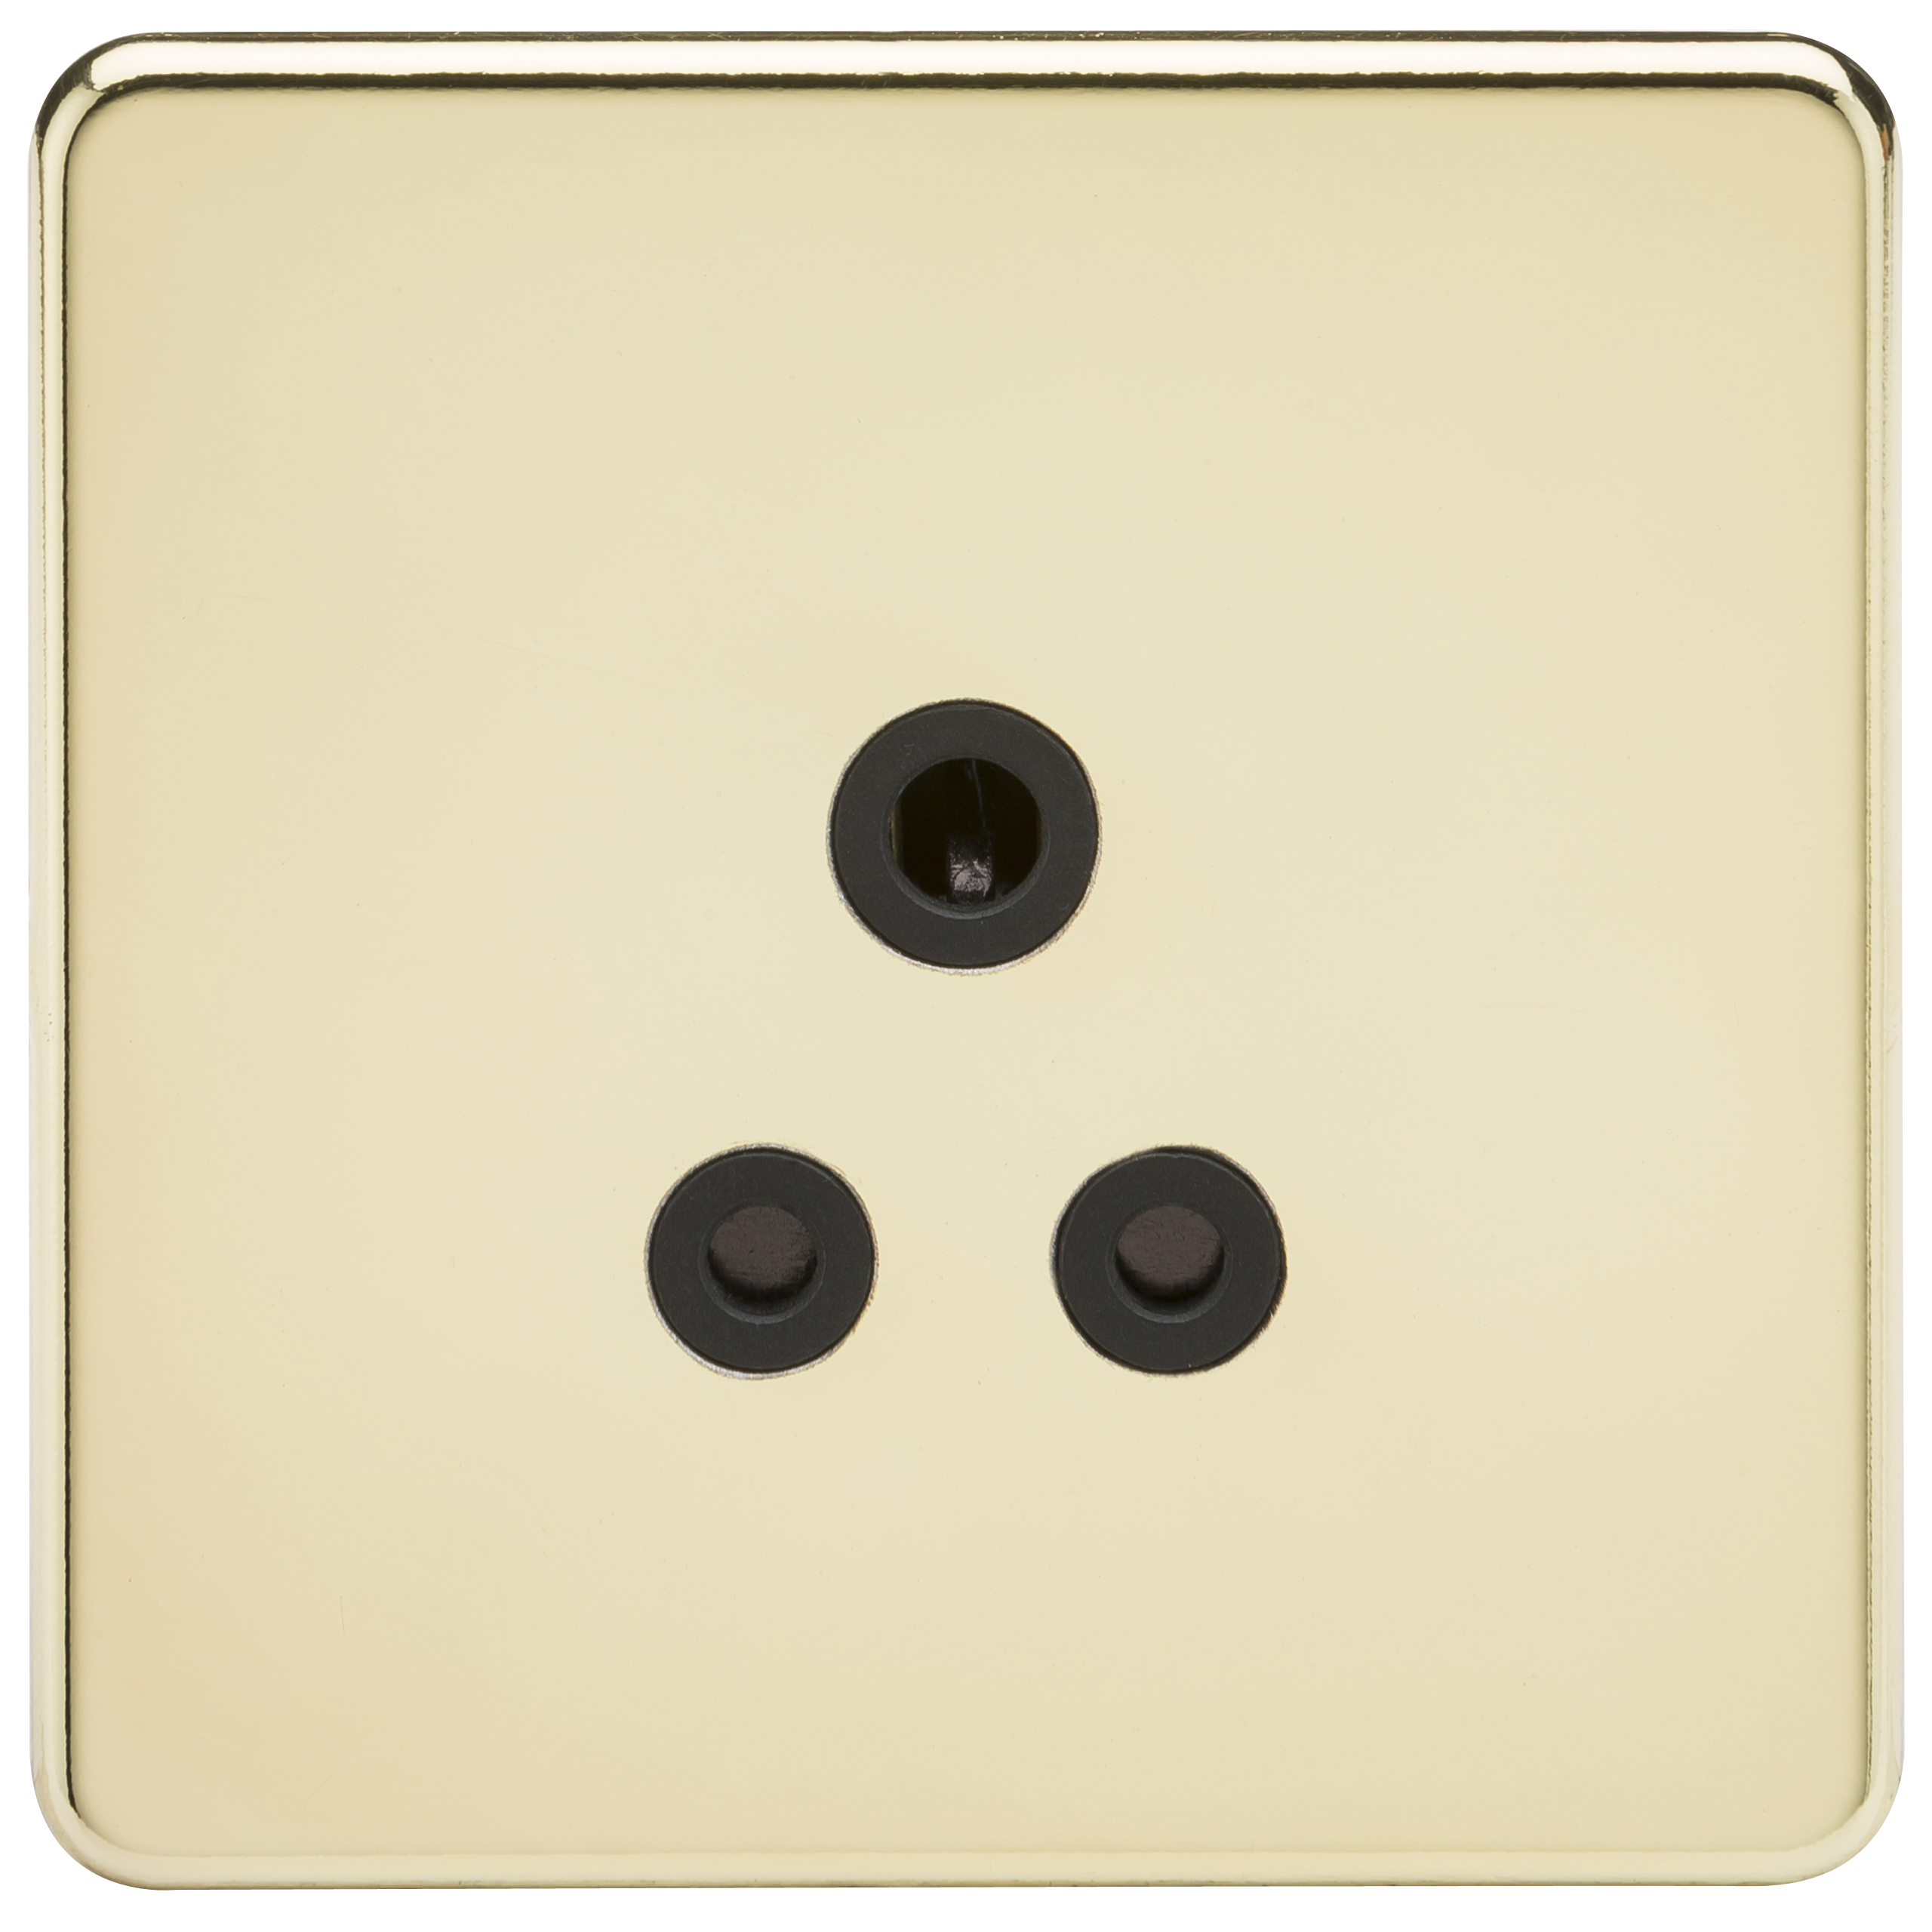 Screwless 5A Unswitched Socket - Polished Brass With Black Insert - SF5APB 